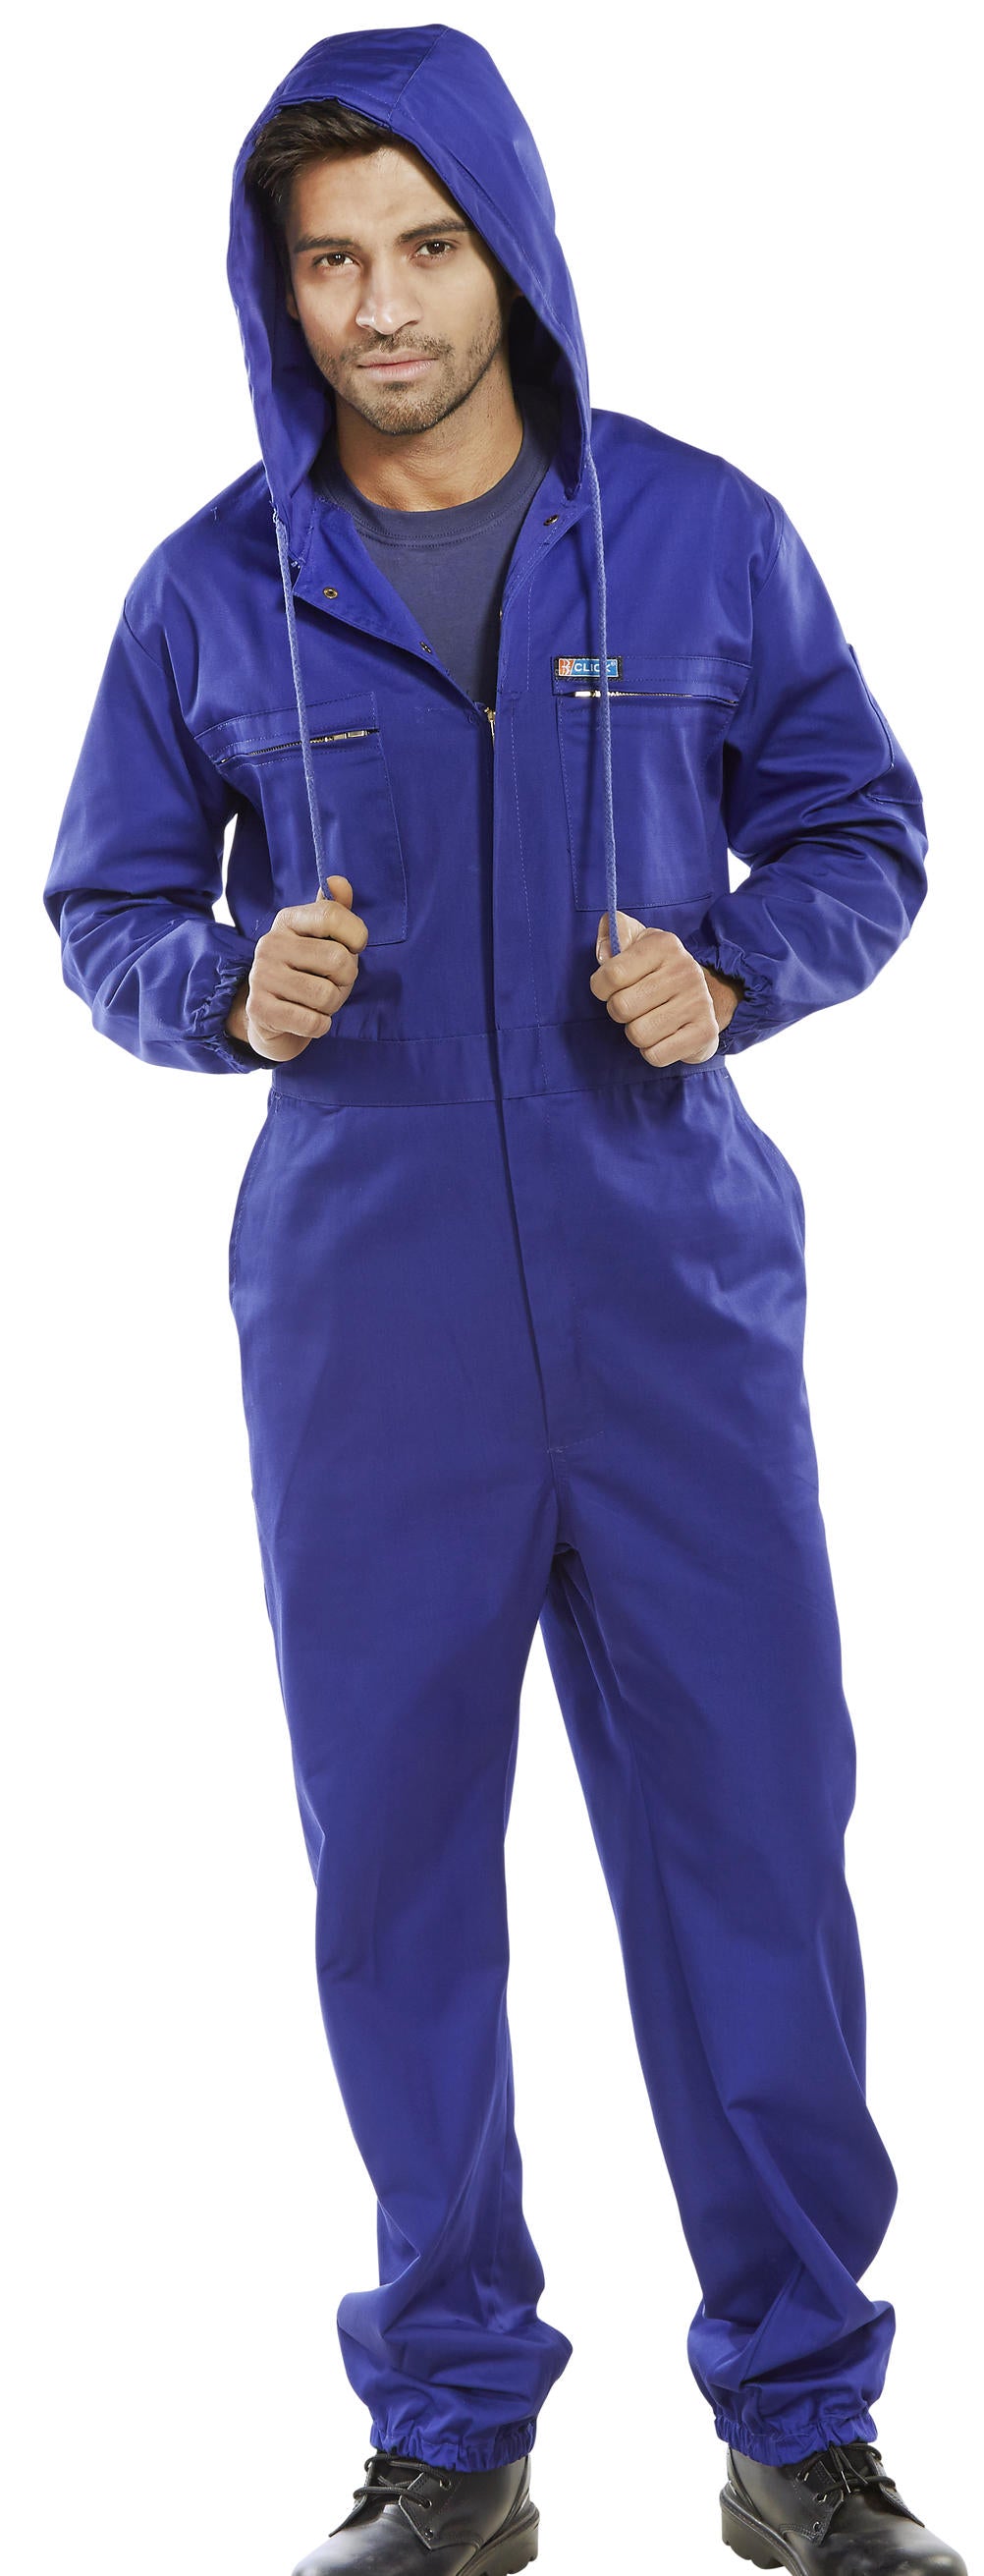 Beeswift PCBSHCAR Royal Blue C/W Hood Super Coverall